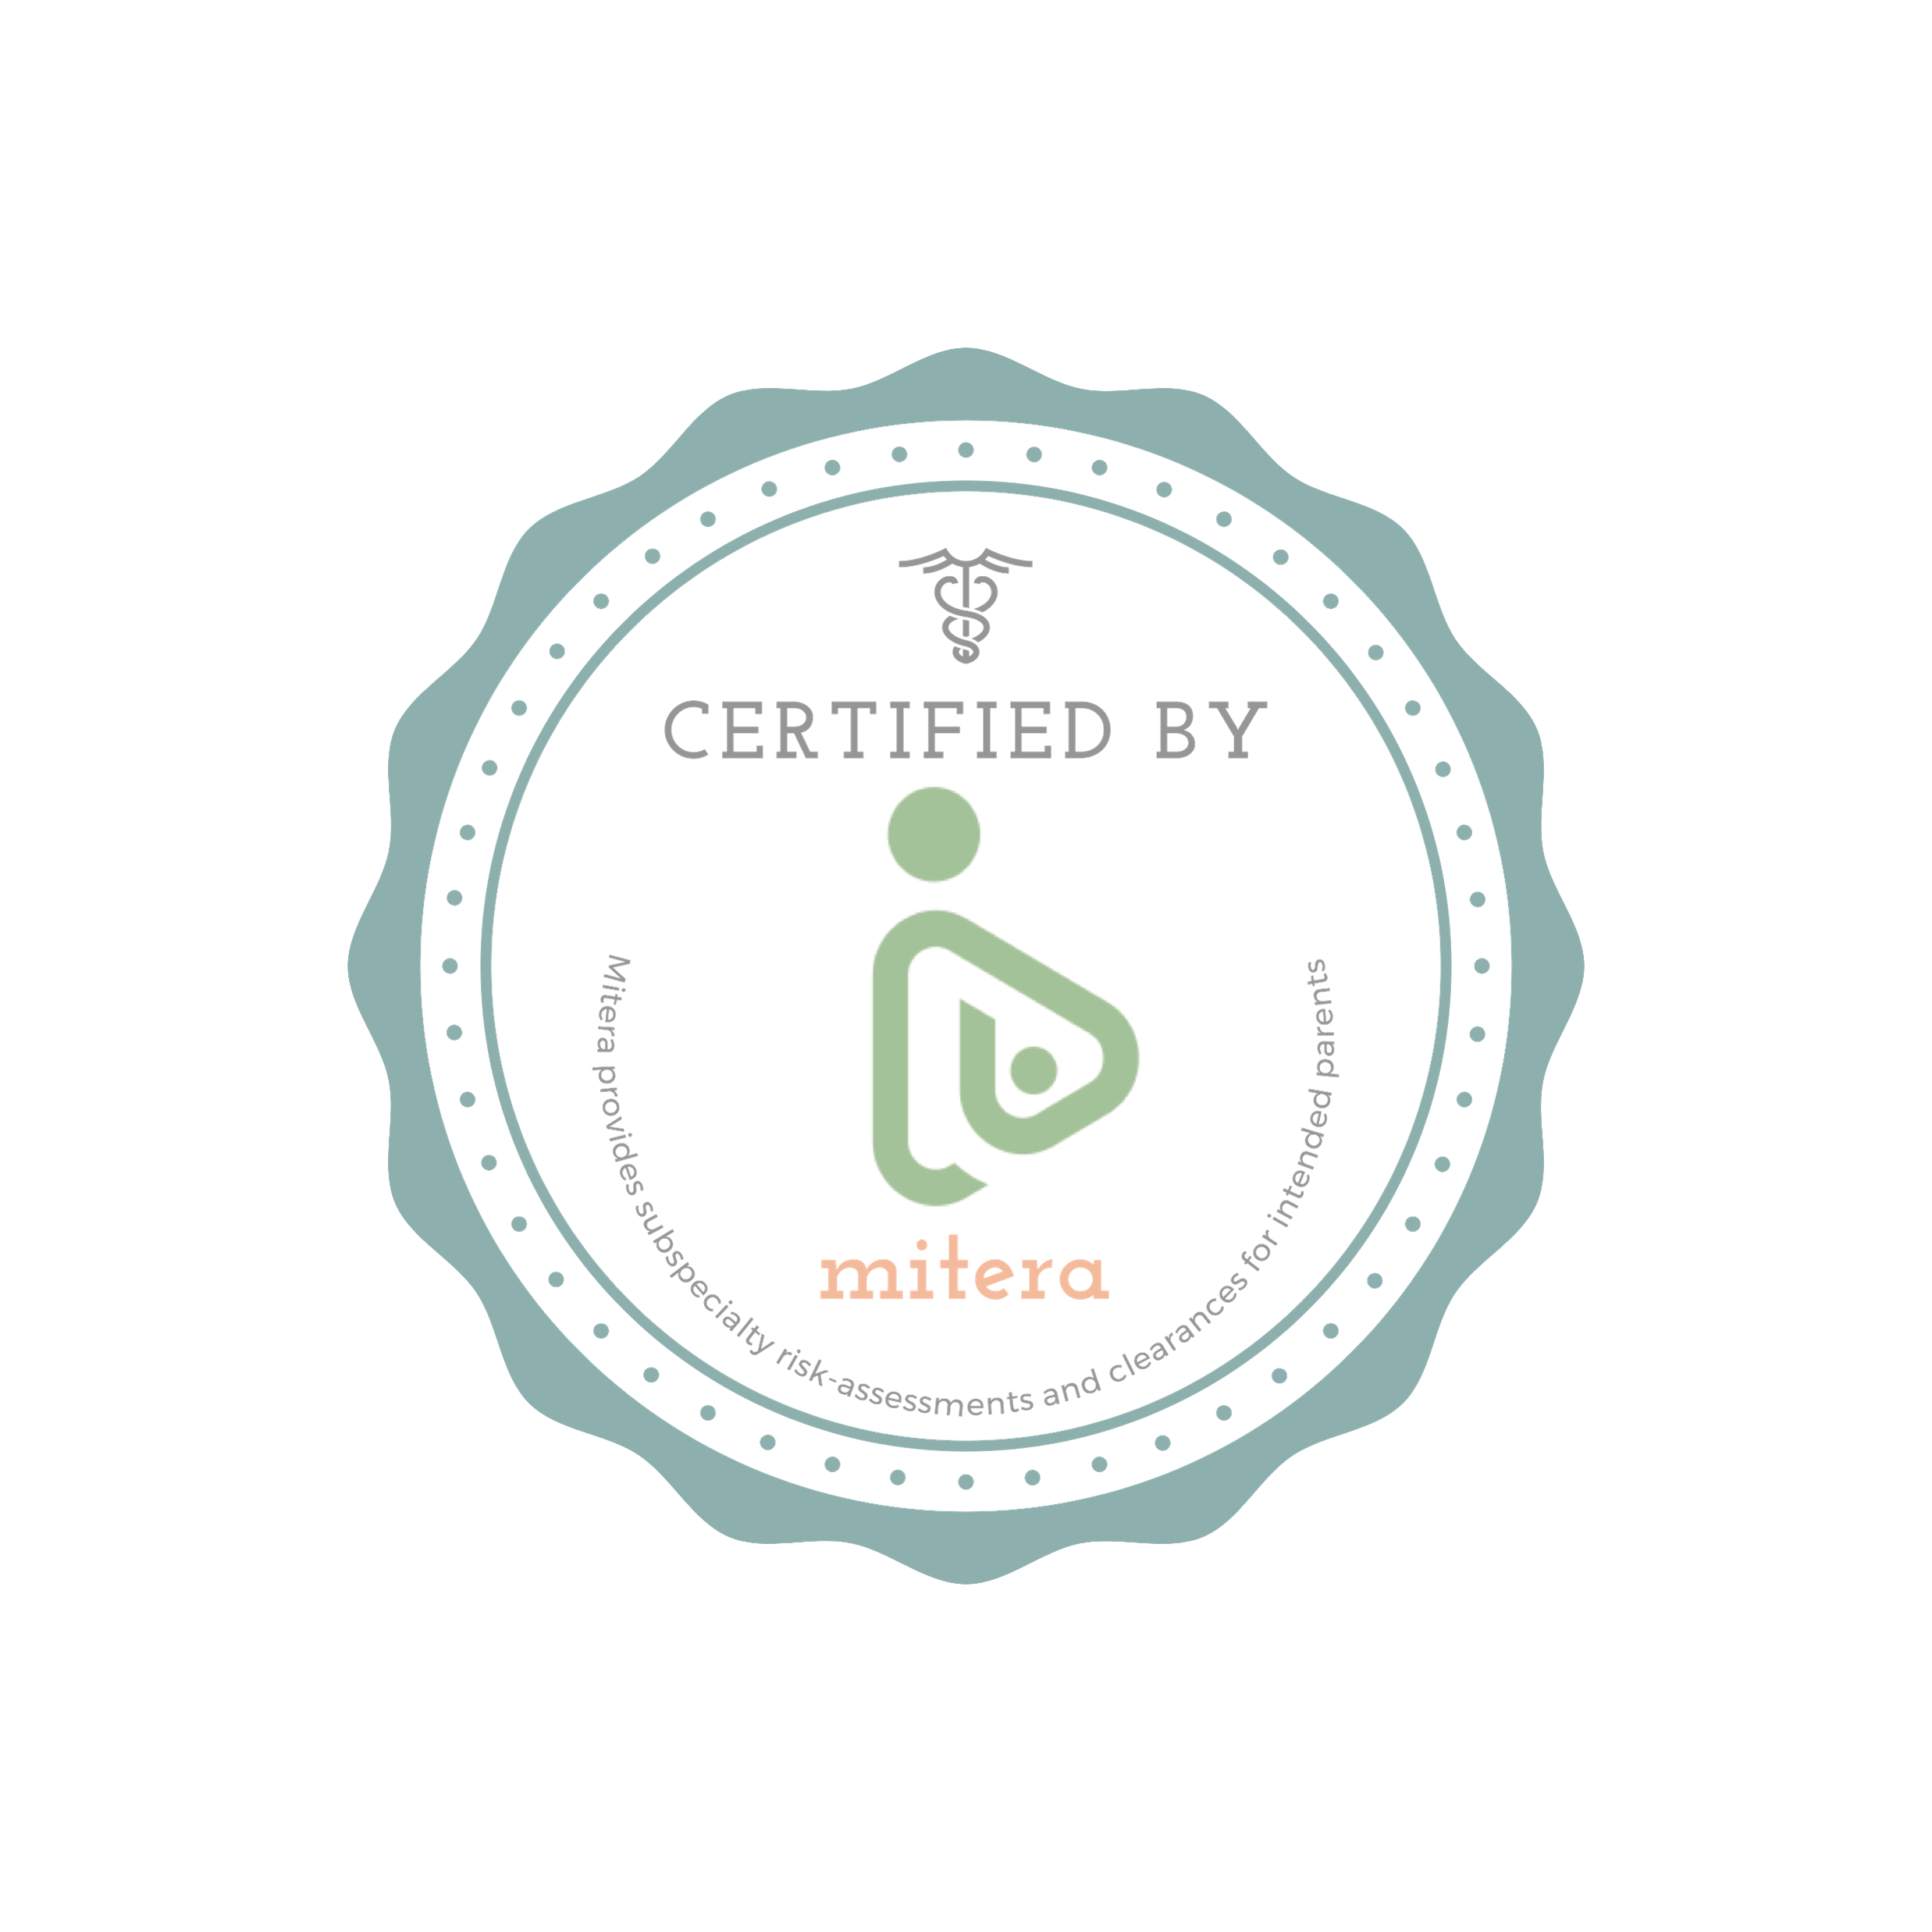 Mitera is a national Maternal-Fetal<br />
Medicine (MFM) telehealth company that<br />
provides obstetrical screening and medical<br />
oversight for pregnancy.